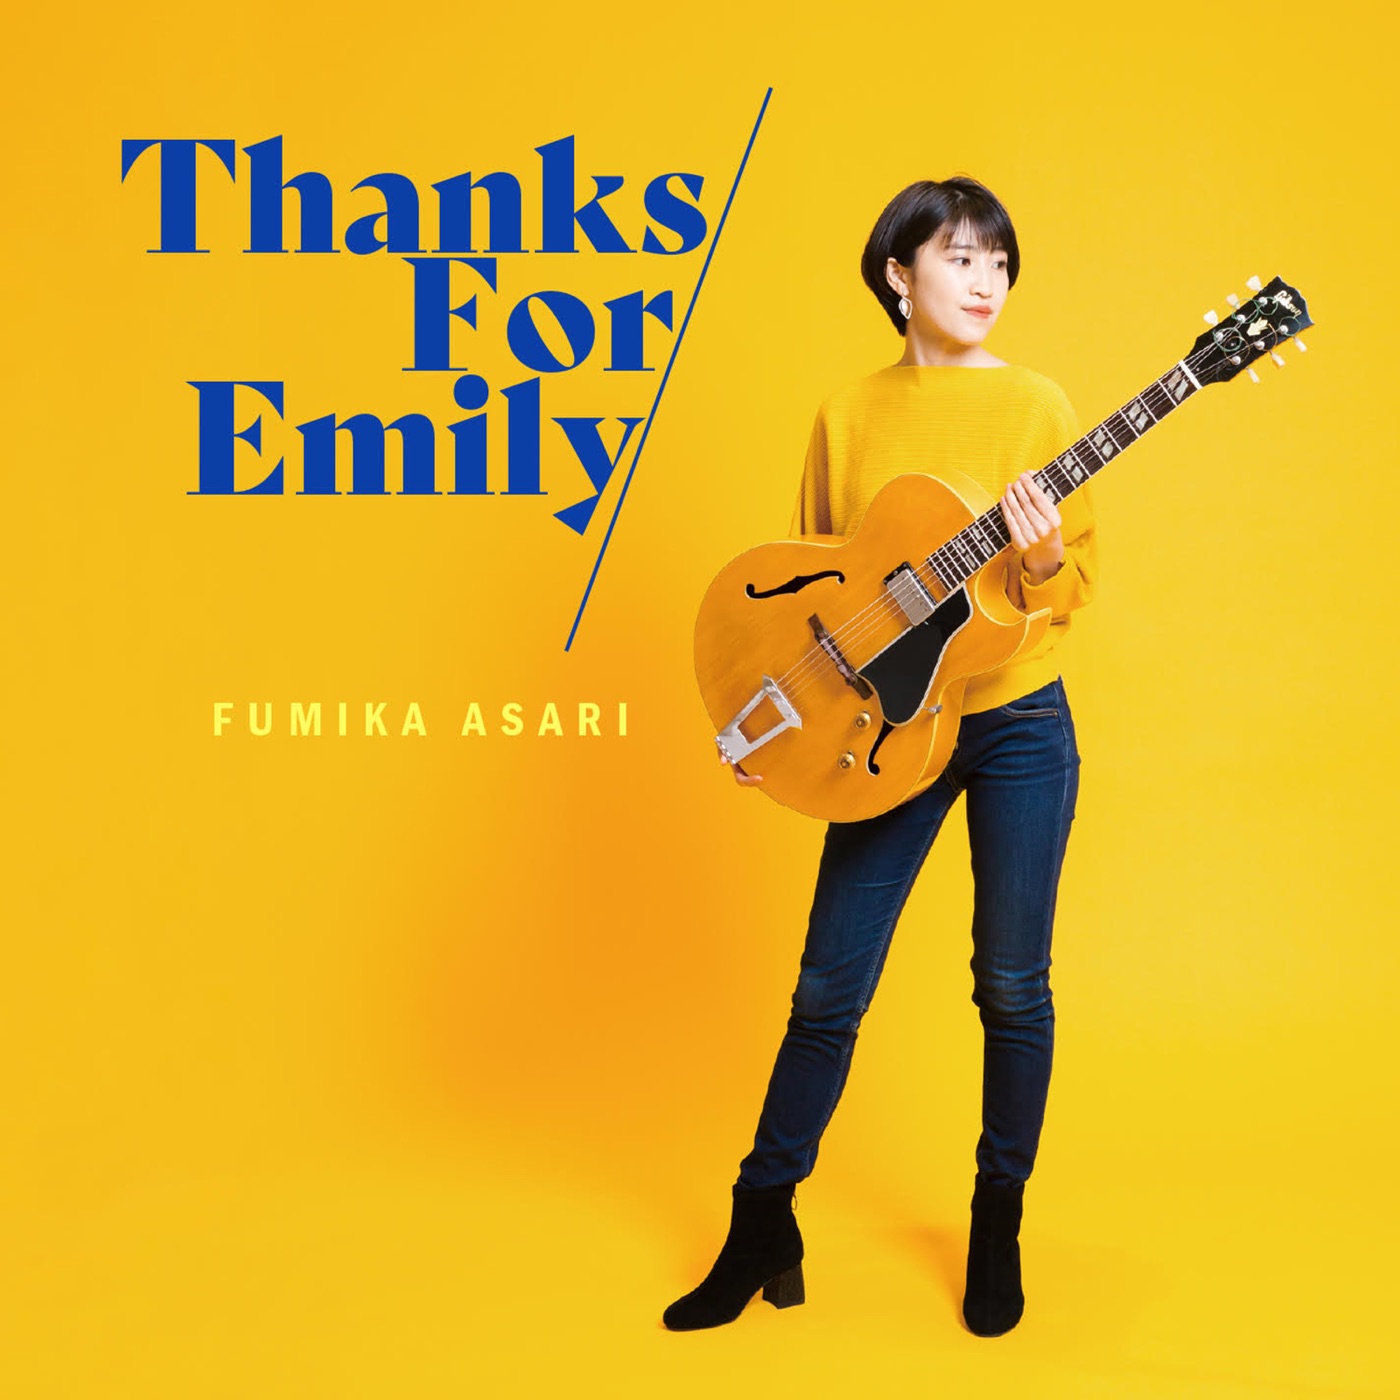 Thanks For Emily by Fumika Asari